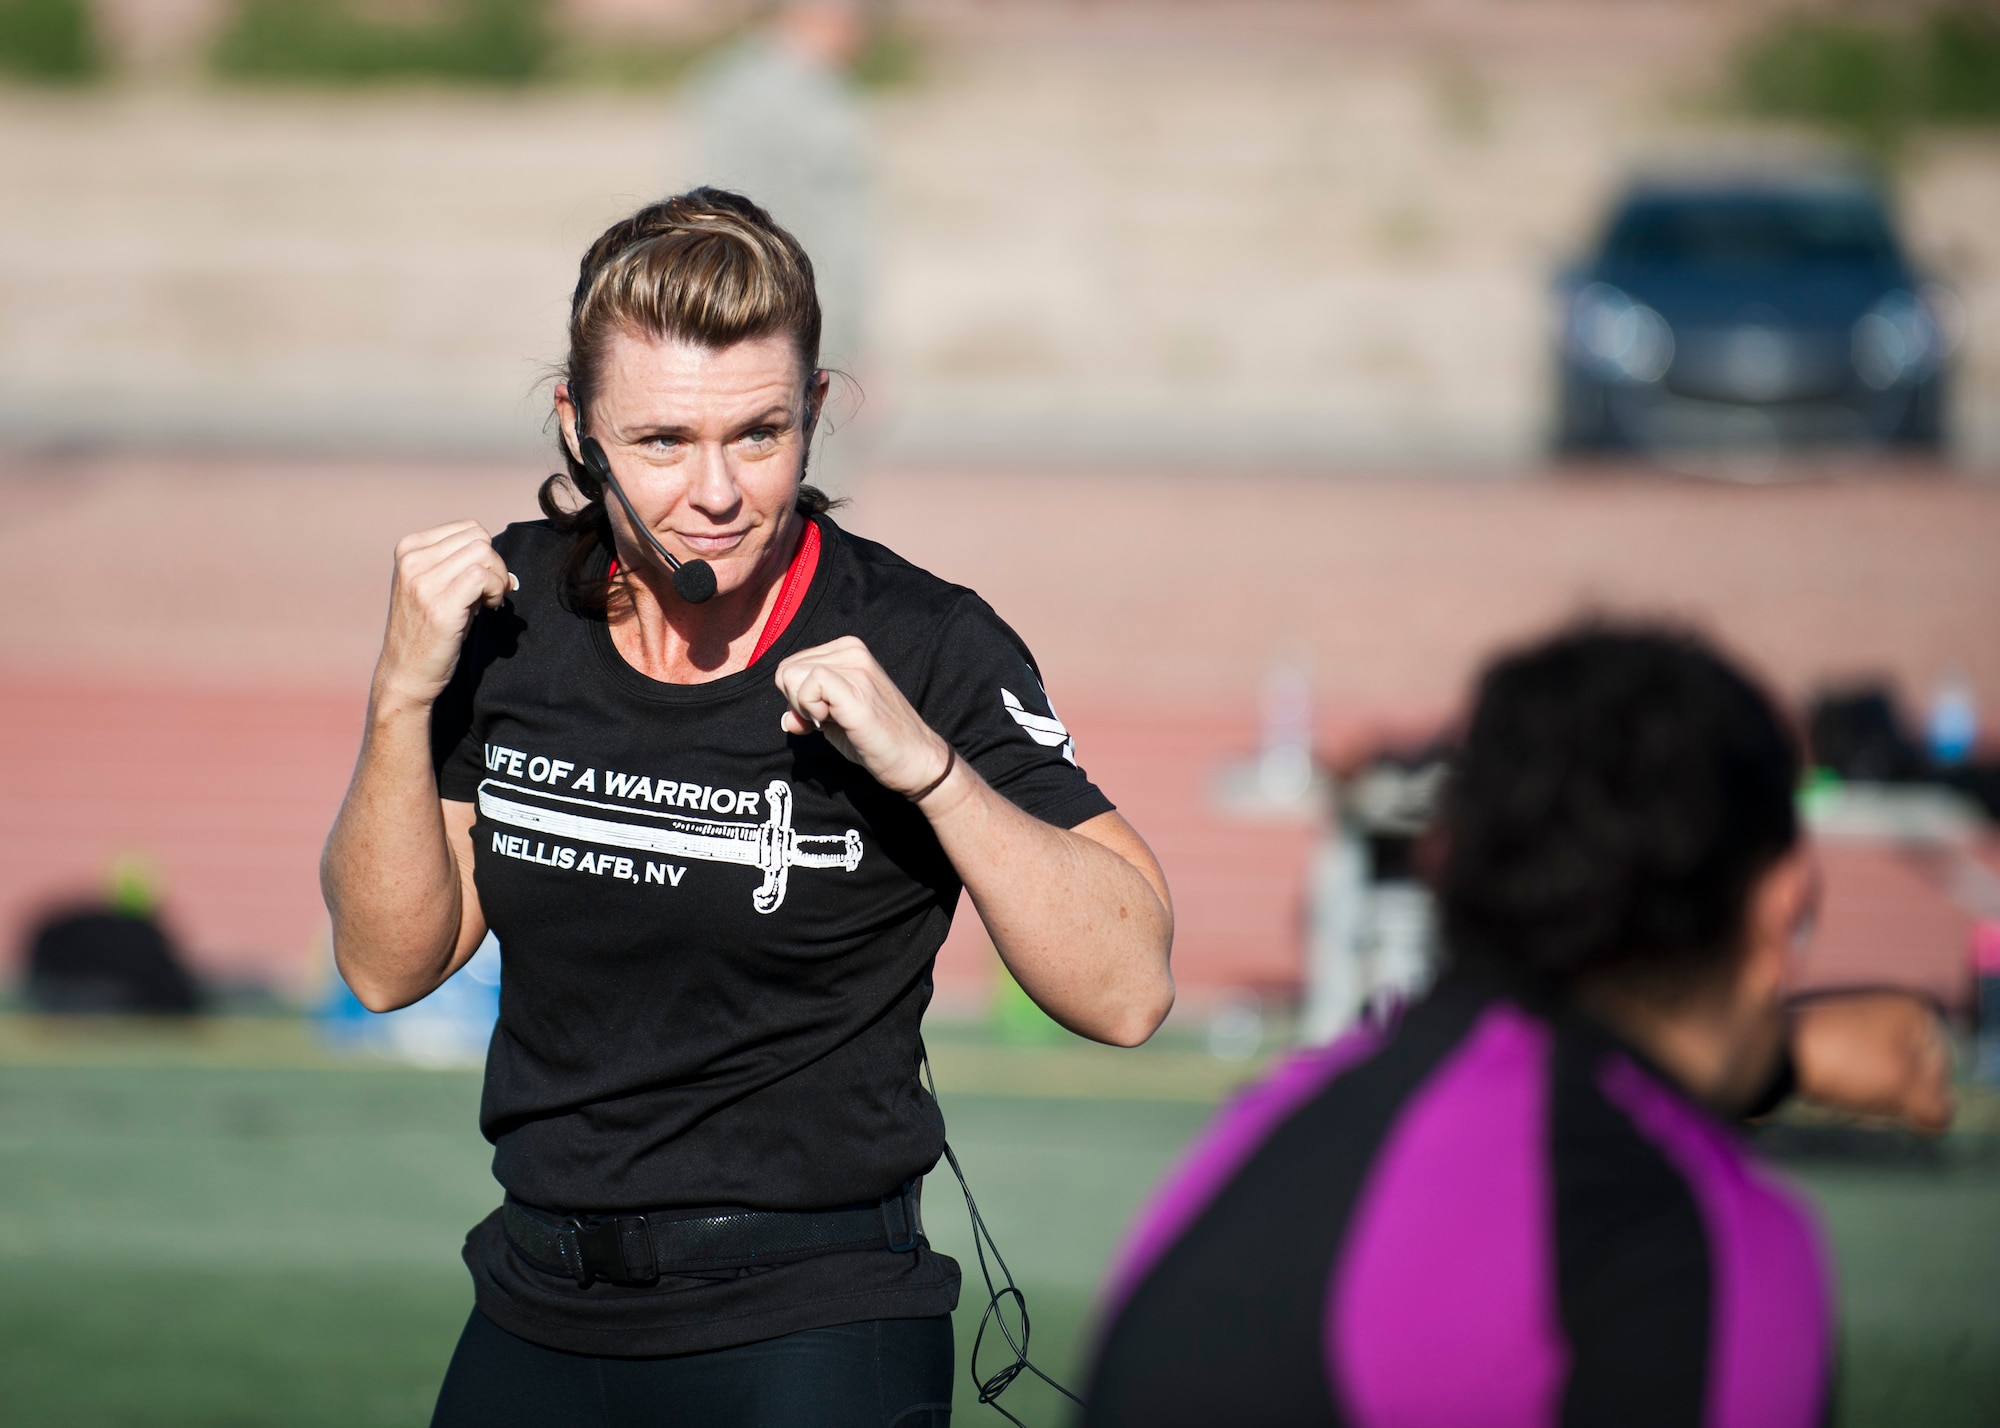 Missy Cornish, wife of Col. Barry Cornish, 99th Air Base Wing commander, leads a group during a Warrior Trained Fitness workout on the field behind the Warrior Fitness Center April 24, 2014, at Nellis Air Force Base, Nev. WTF is a high-intensity workout designed as part of the “Life of a Warrior” concept encouraging individuals to live a healthier lifestyle. (U.S. Air Force photo by Airman 1st Class Thomas Spangler)